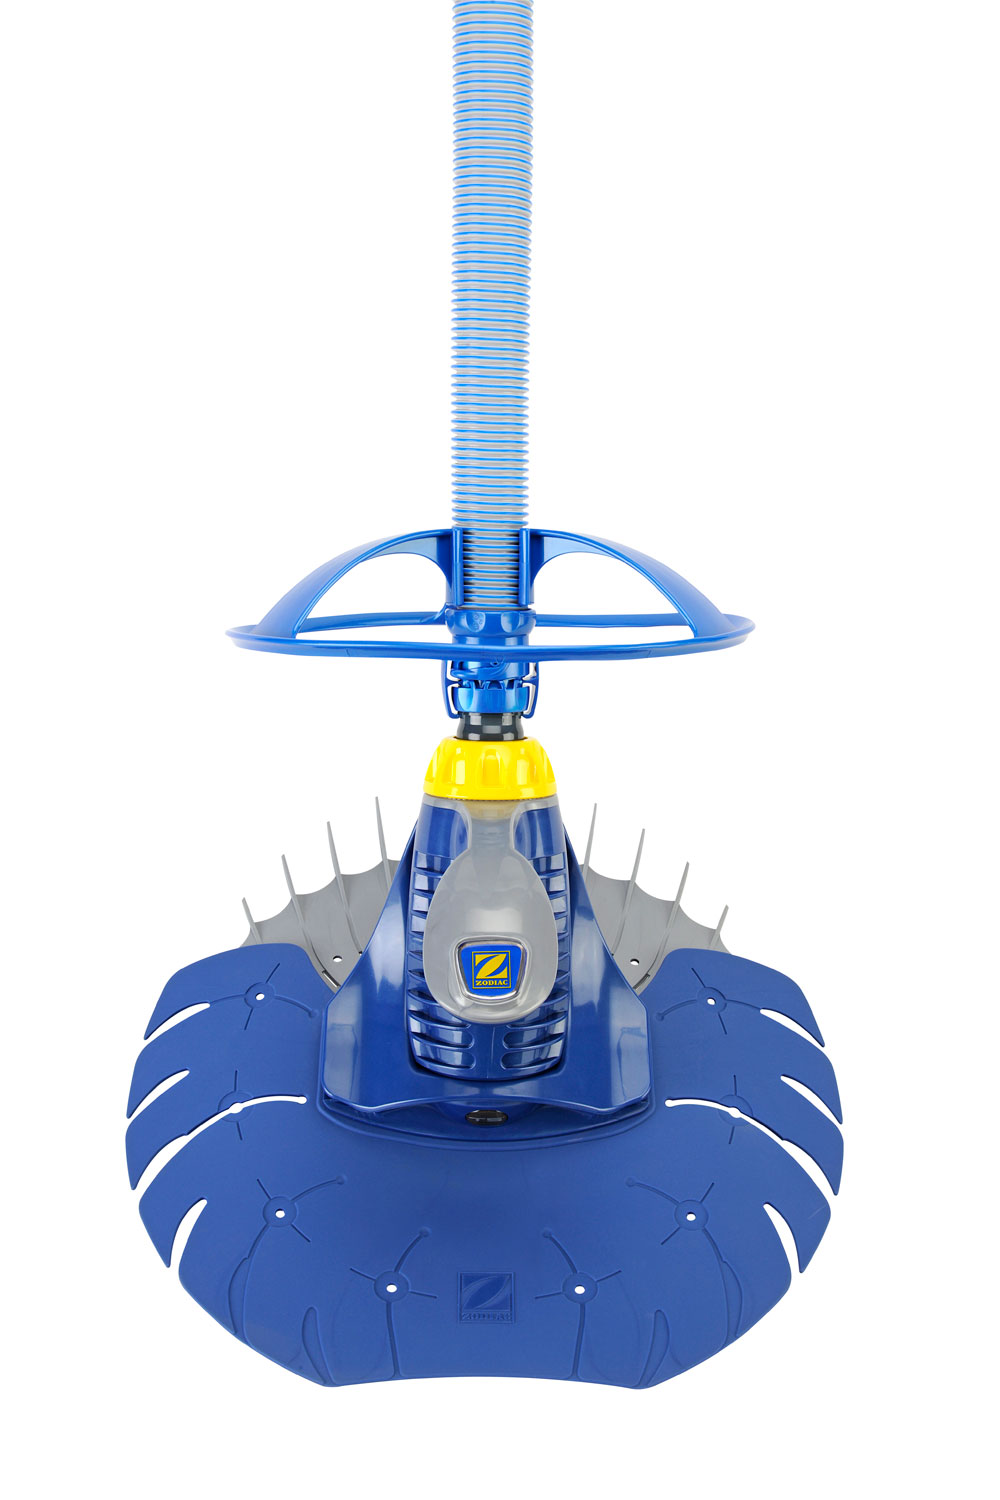 zodiac-t5-duo-suction-pool-cleaner-zodiac-pool-systems